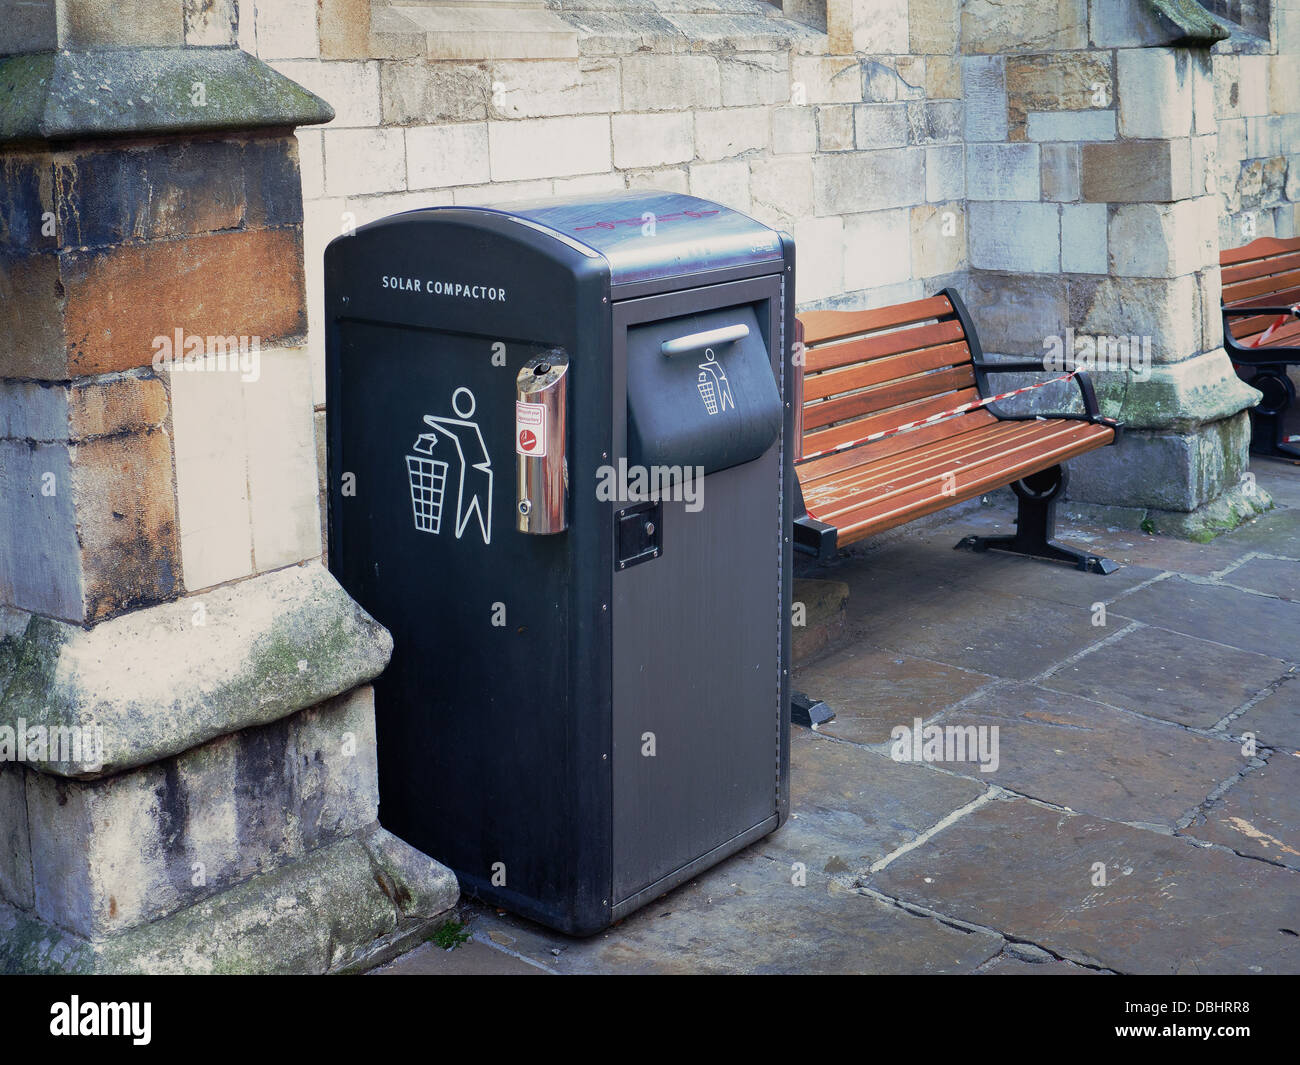 A 'Solar Compactor' litter bin uses solar energy to compact down waste, increasing its capacity compared to standard bins. Stock Photo